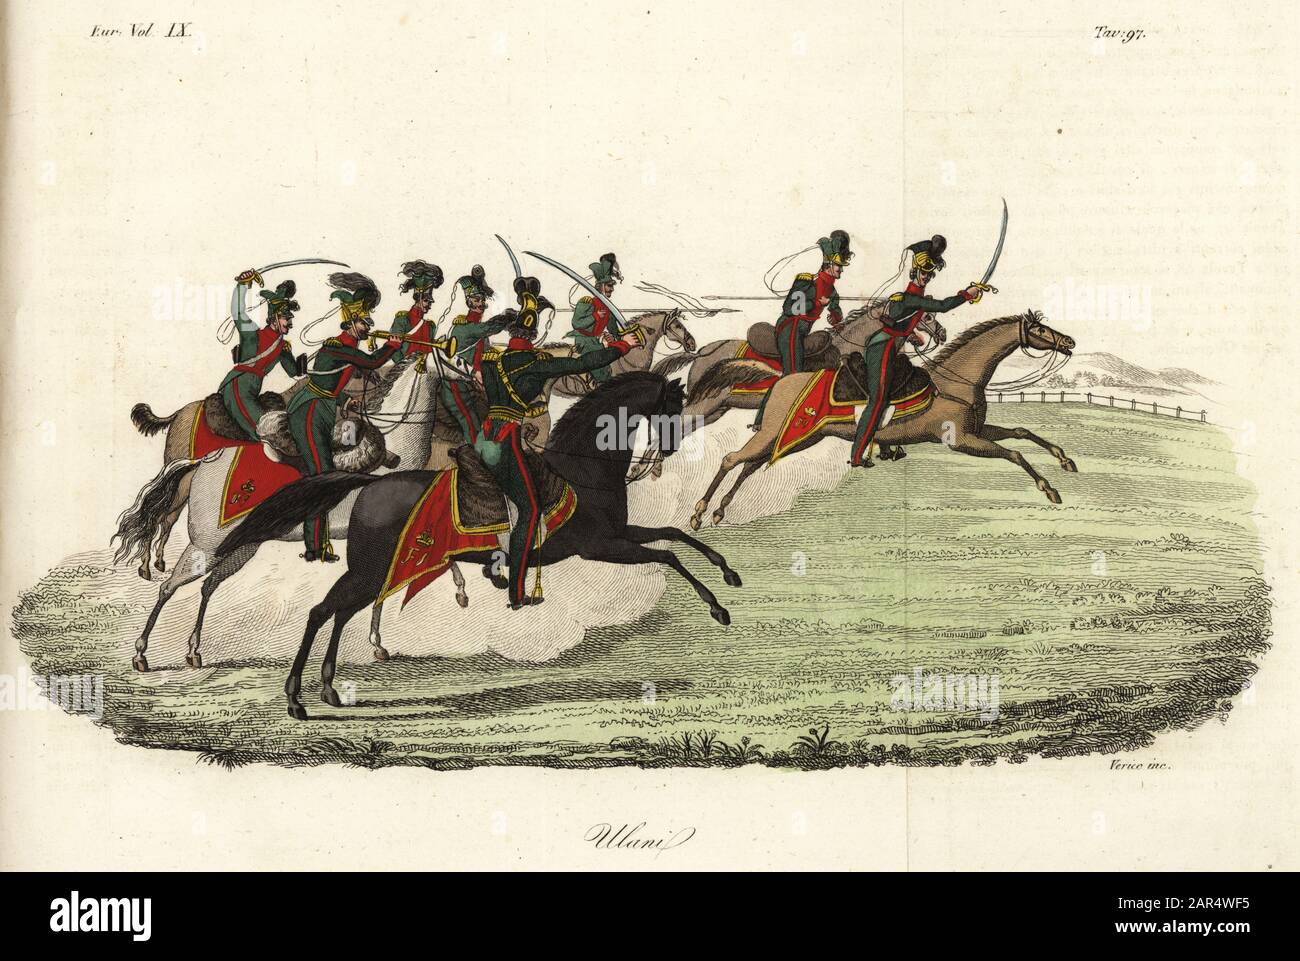 Lancers or Uhlan light cavalry in the (German) Imperial Army, 19th century. Ulani. Handcoloured copperplate engraving by Antonio Verico from Giulio Ferrario’s Costumes Ancient and Modern of the Peoples of the World, Il Costume Antico e Moderno, Florence, 1844. Stock Photo